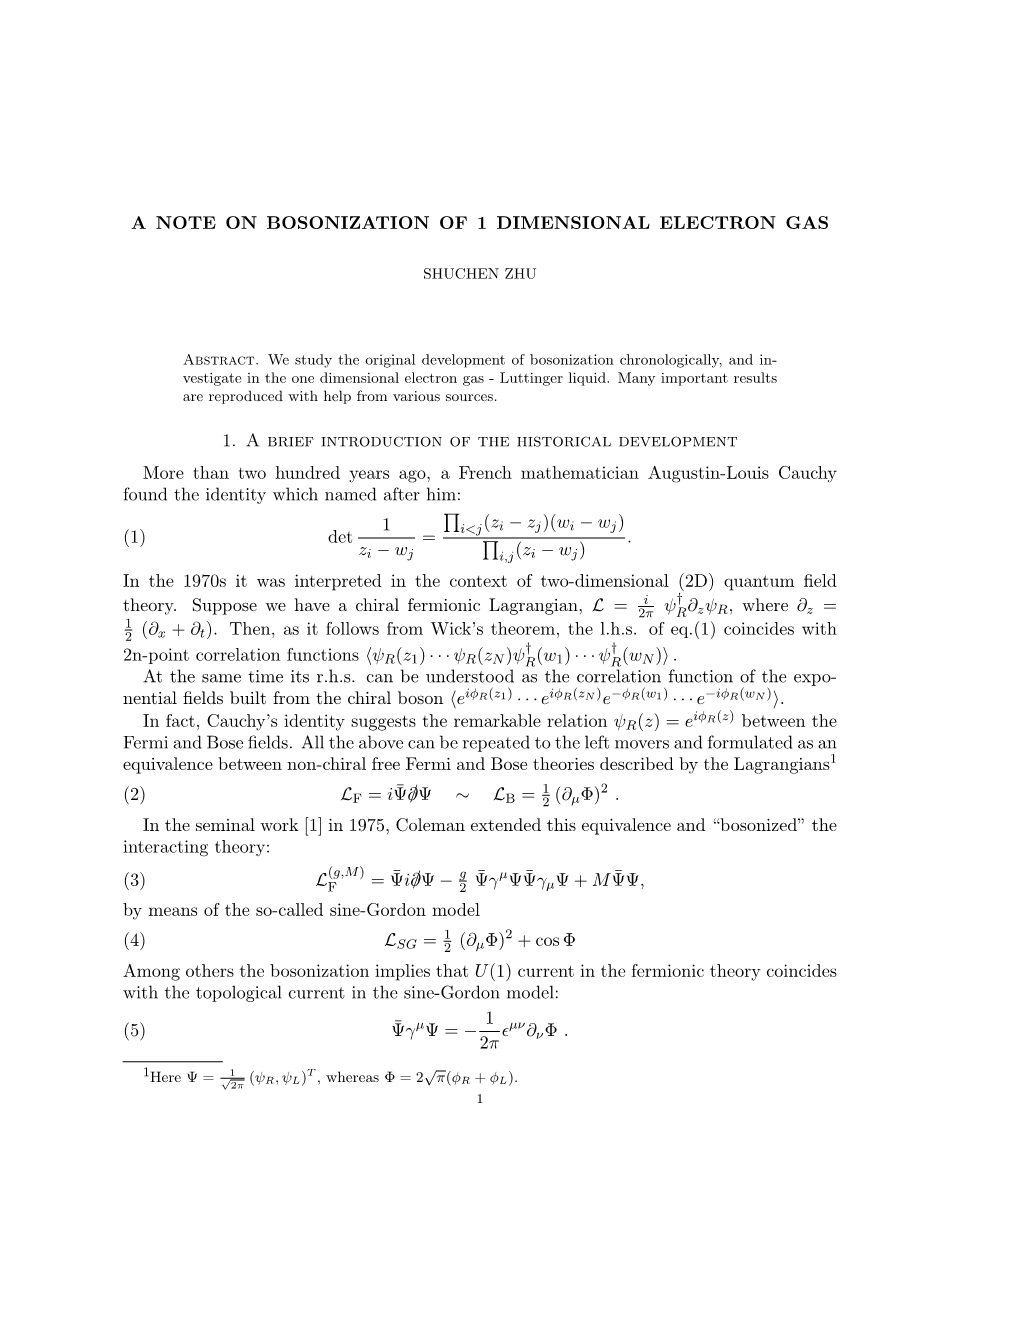 A Note on Bosonization of 1 Dimensional Electron Gas 11